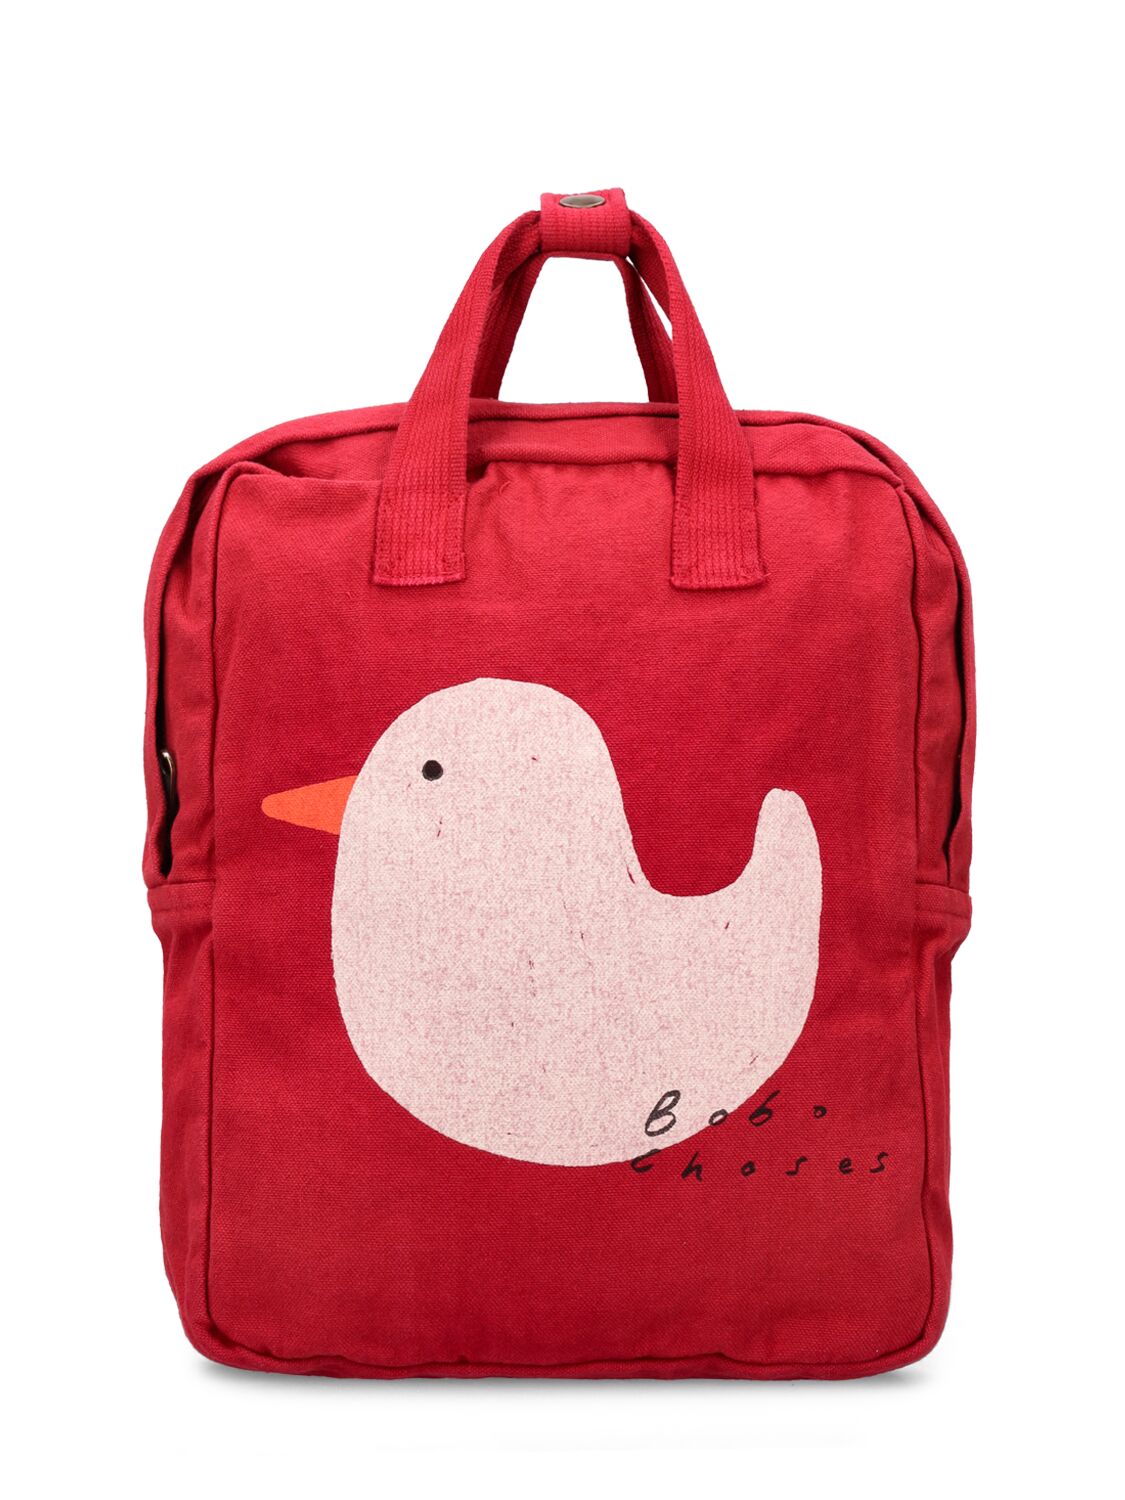 BOBO CHOSES PRINTED COTTON CANVAS BACKPACK